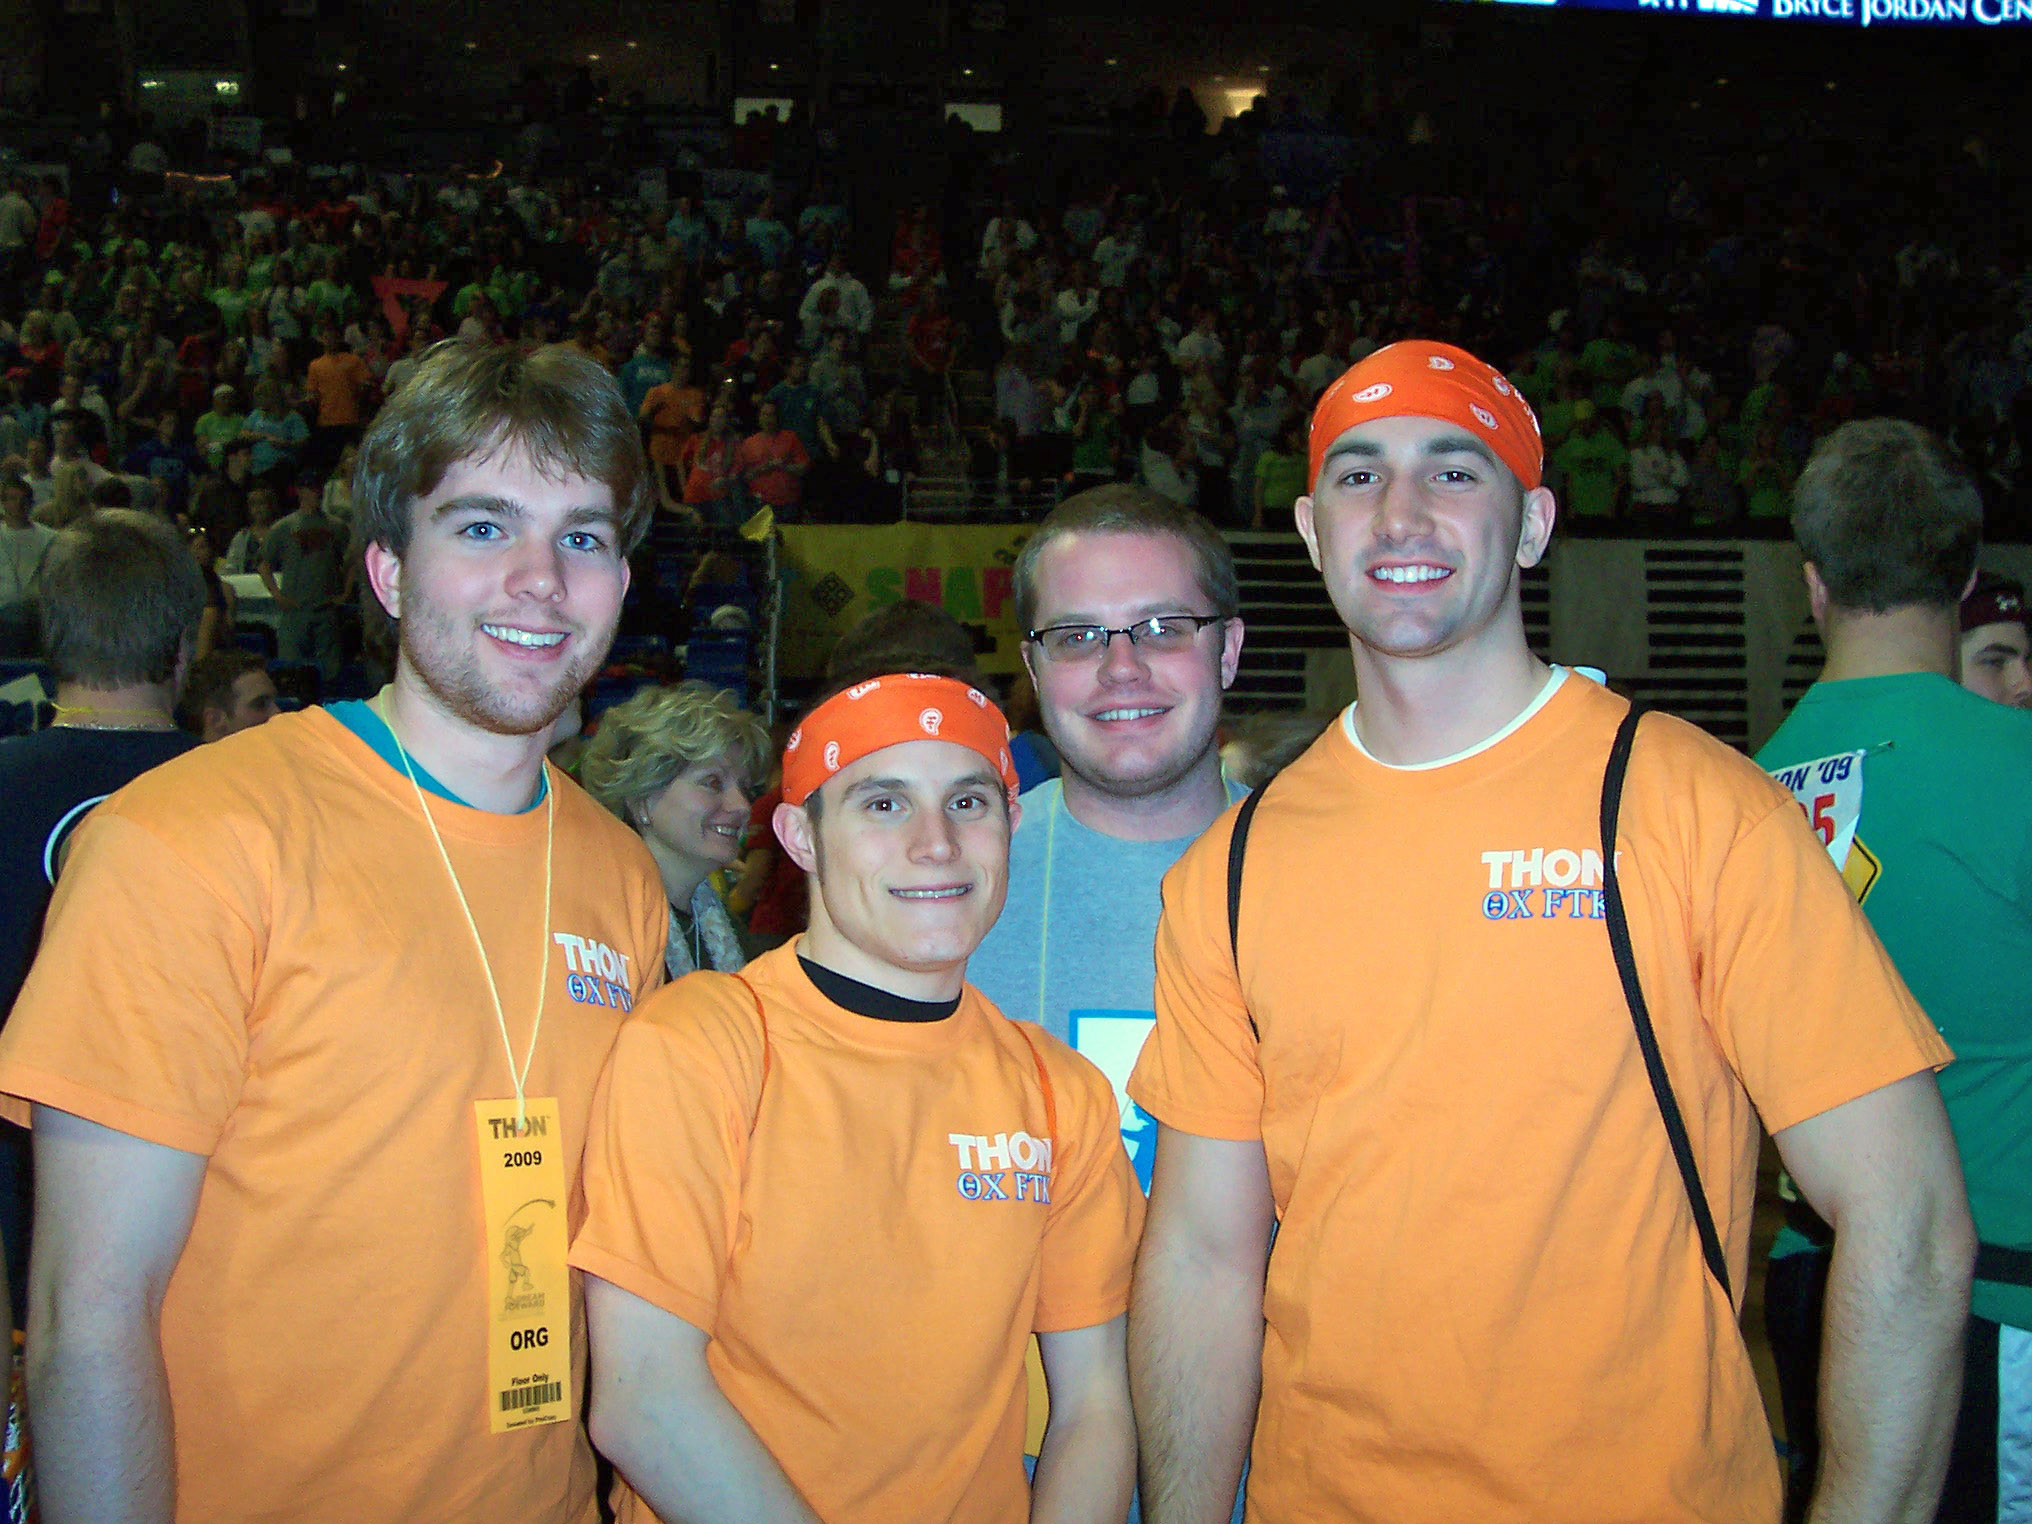  L to R: Daniel Cartwright, Jasen Marshall, James Patterson and Casey Leman at THON 